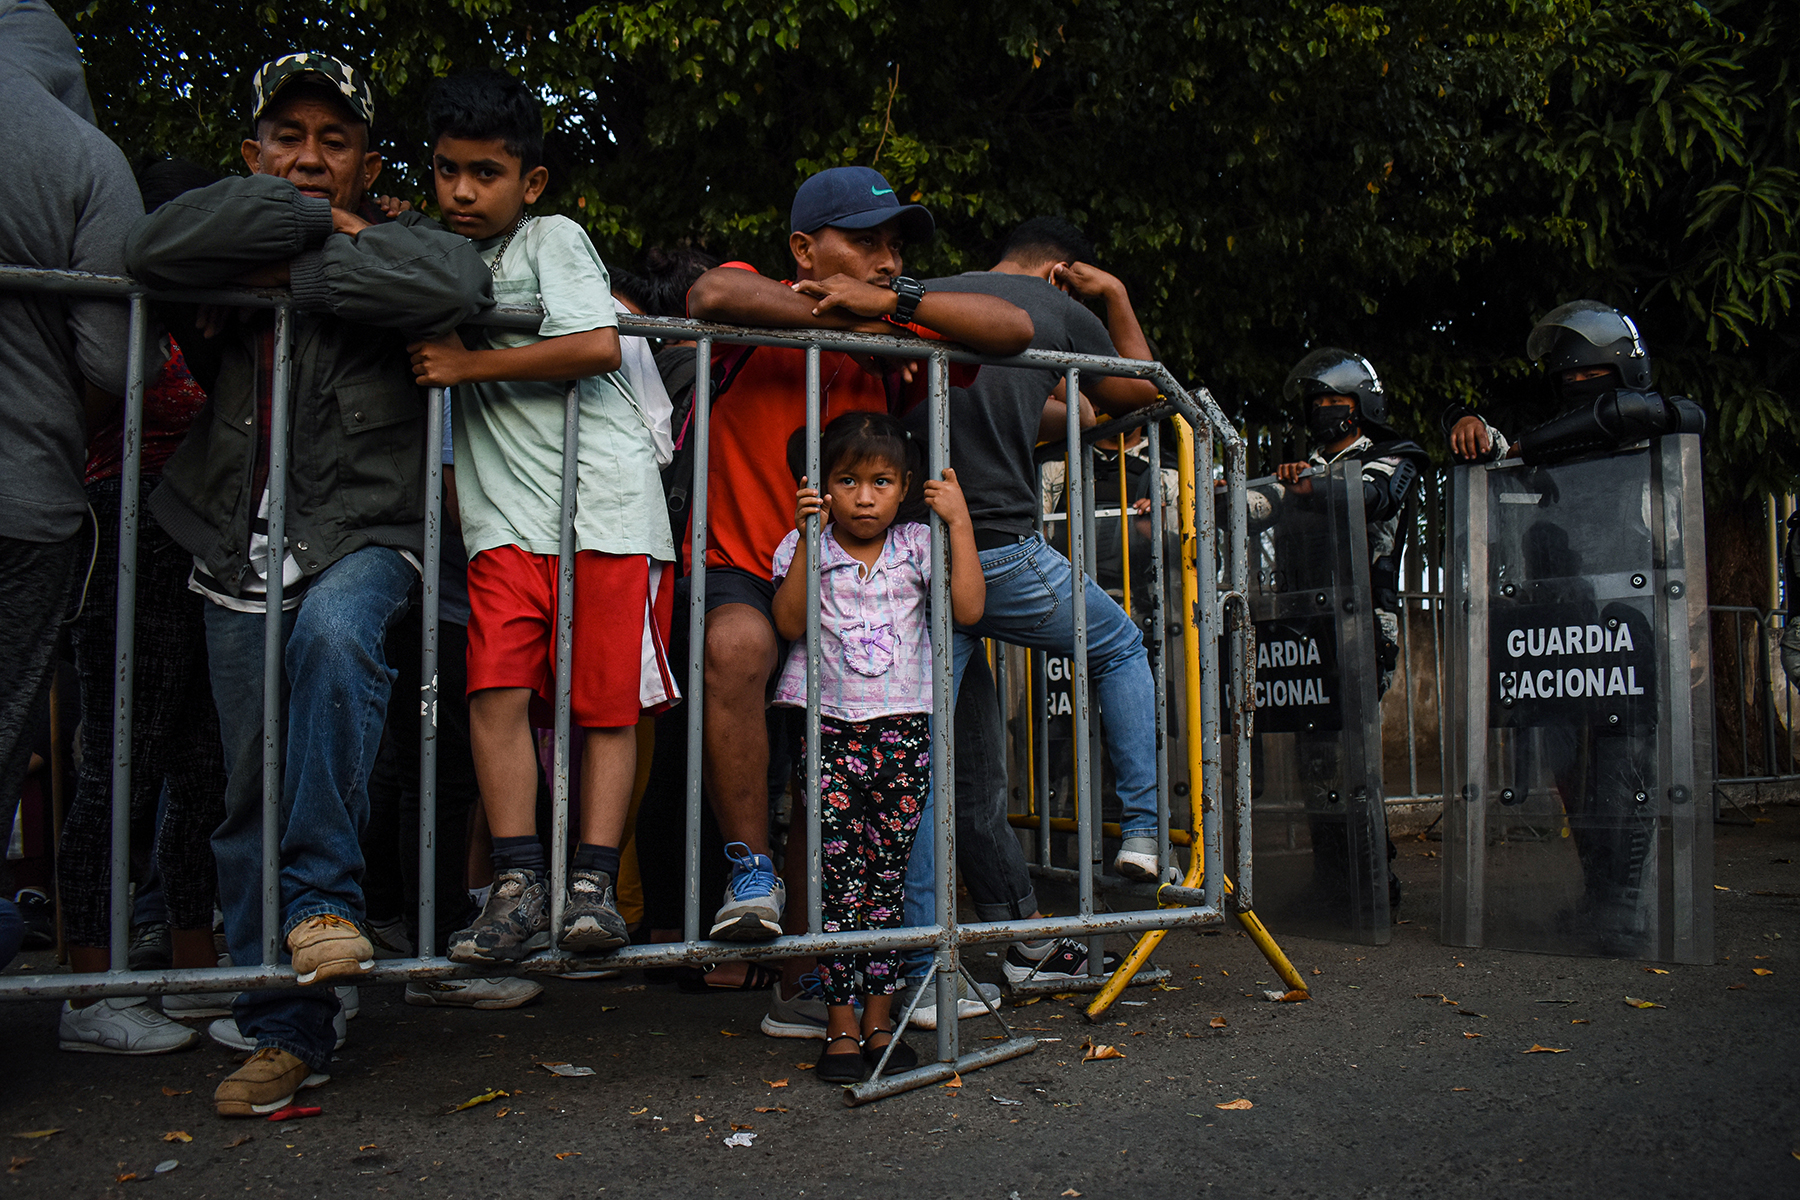 Yobel Ruiz and his daughter, Milaidy, 5, wait outside one of the immigration offices in Tapachula, Mexico, on March 8, 2022. The pair fled their home in Panama’s Darién Province the month before, after guerrillas kidnapped Ruiz’s wife. Ruiz hopes to be granted asylum and move to Florida, where a cousin lives. He still doesn’t know the fate of his wife. (Photo by Juliette Rihl/Cronkite Borderlands Project)
